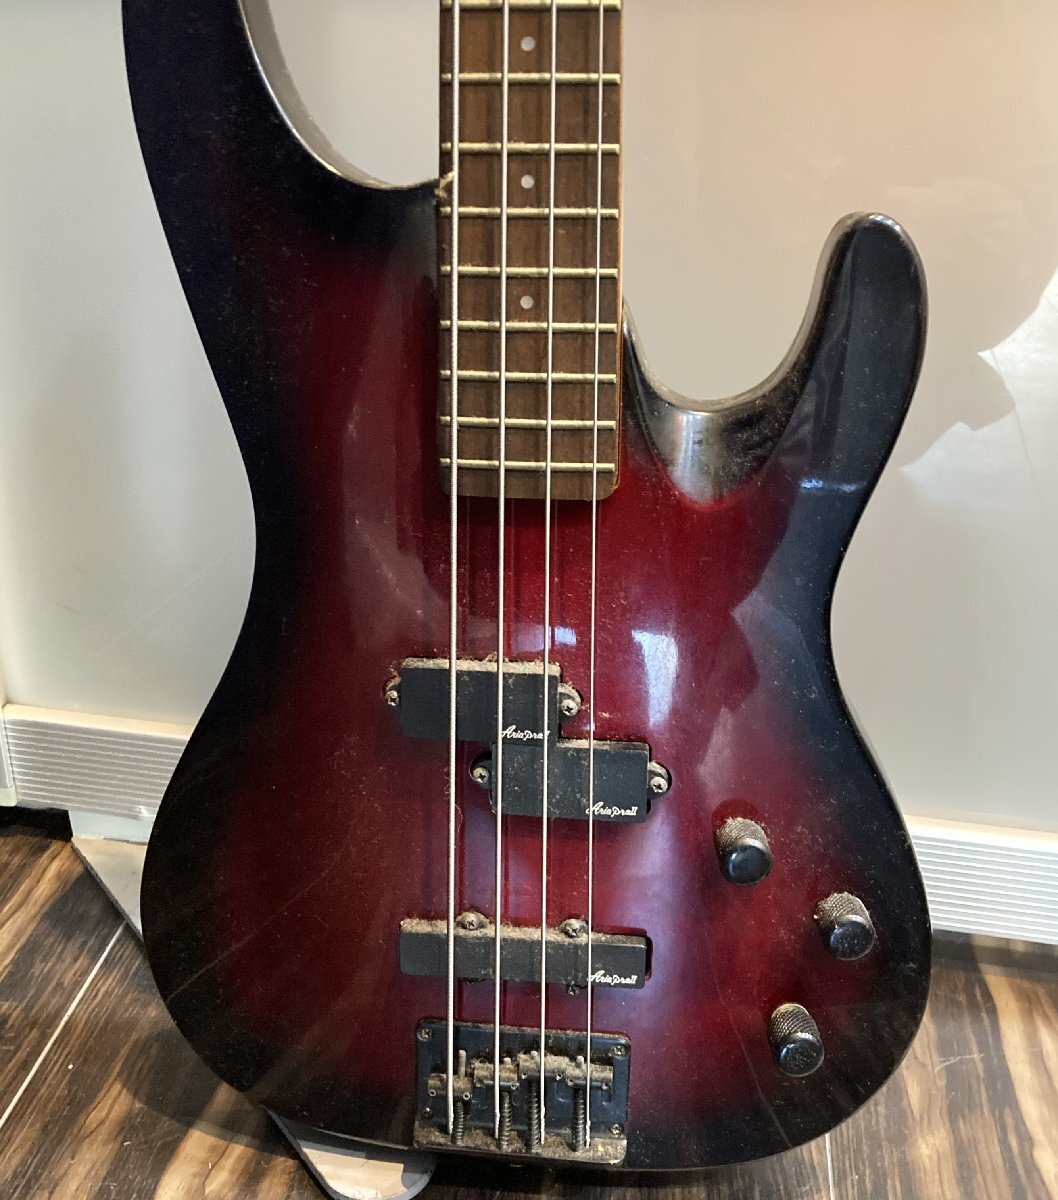 [76]1 jpy ~ Aria Pro Ⅱ Aria Pro 2 electric bass MAGNA Series musical instruments stringed instruments sound out no check present condition goods junk 